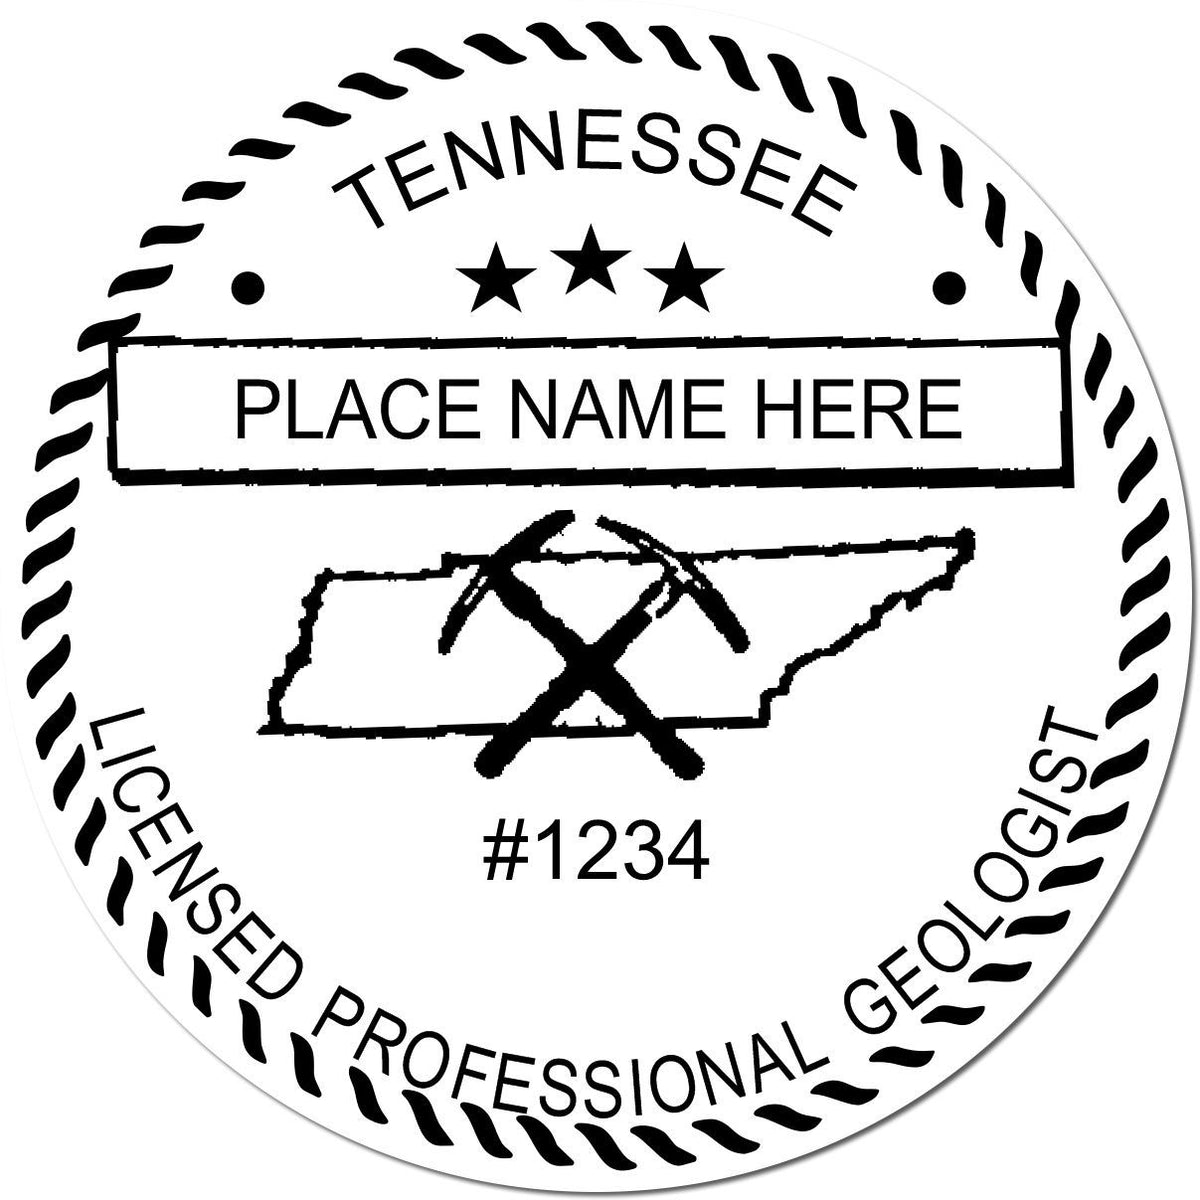 This paper is stamped with a sample imprint of the Tennessee Professional Geologist Seal Stamp, signifying its quality and reliability.